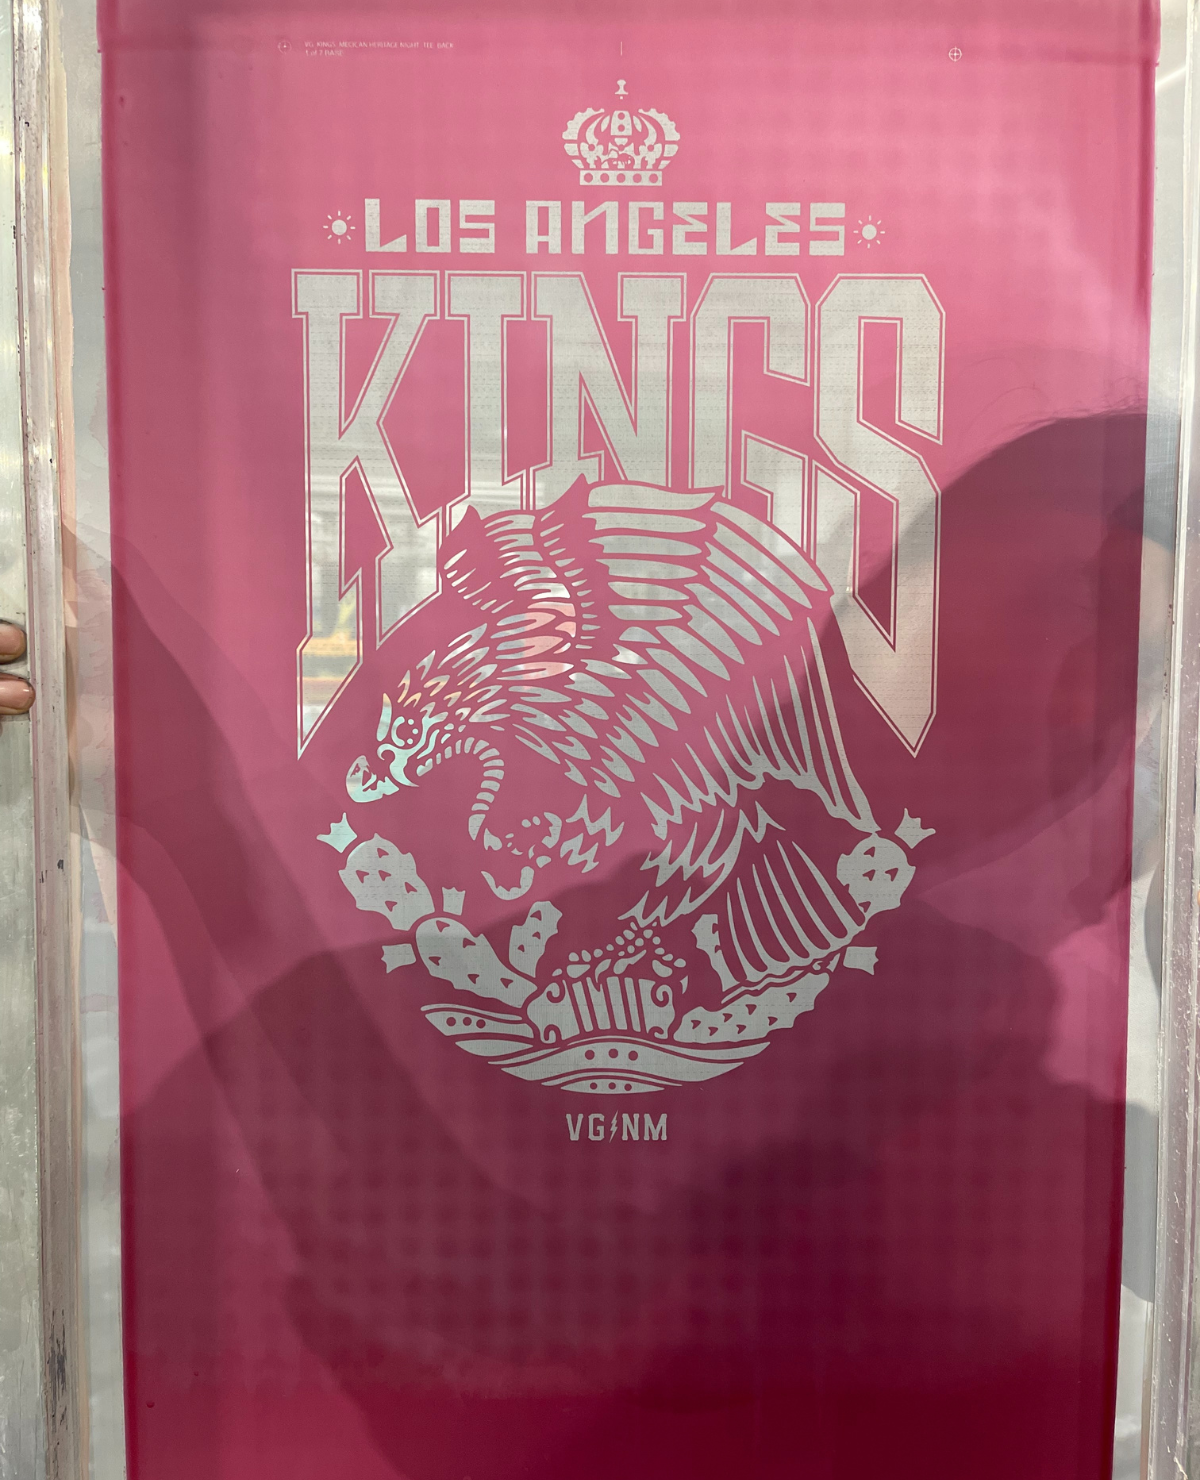 Orquest aedelweiss Hockey Clothing company - The Los Angeles Kings celebrate their local Mexican Community tonight in some fantastic ways. 